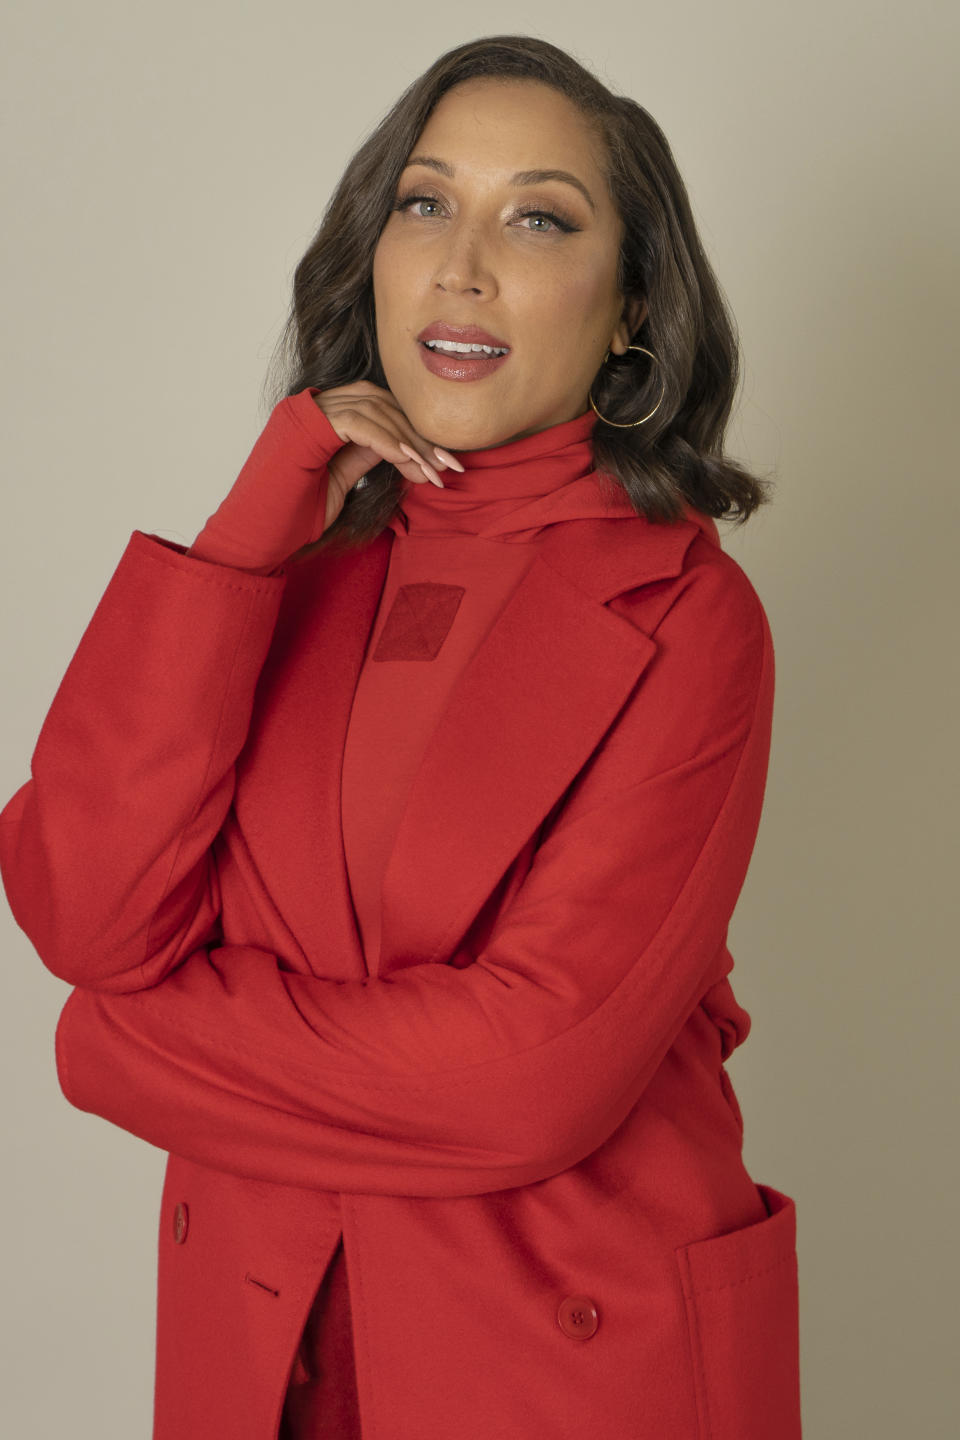 Robin Thede poses for a portrait to promote her HBO series, “A Black Lady Sketch Show,” on Wednesday, April 5, 2023, in New York. (AP Photo/Gary Gerard Hamilton)